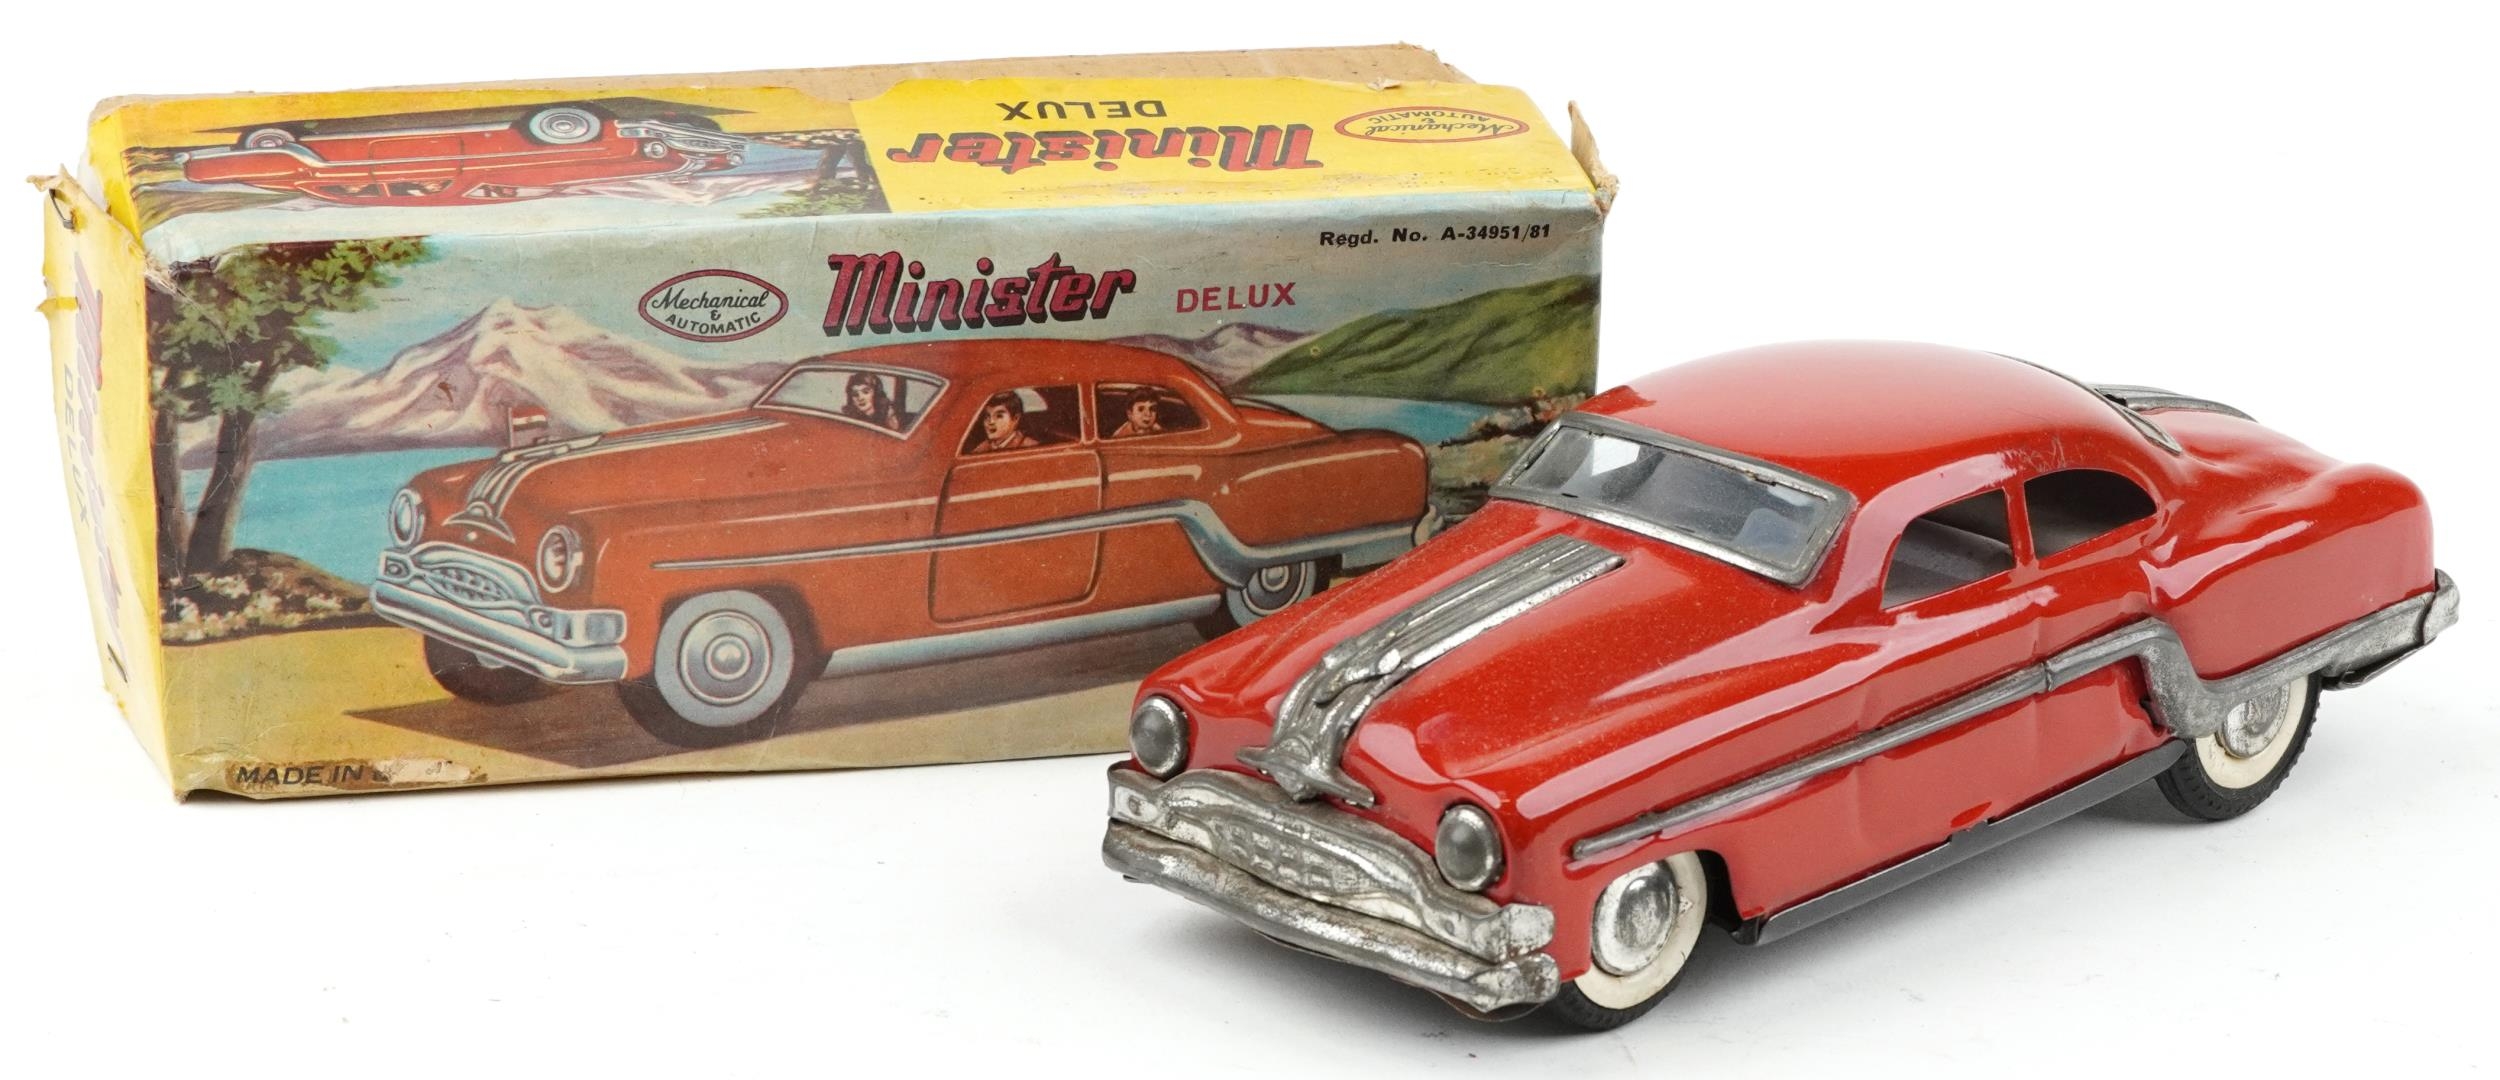 Vintage Minister Delux tinplate mechanical automatic car with box